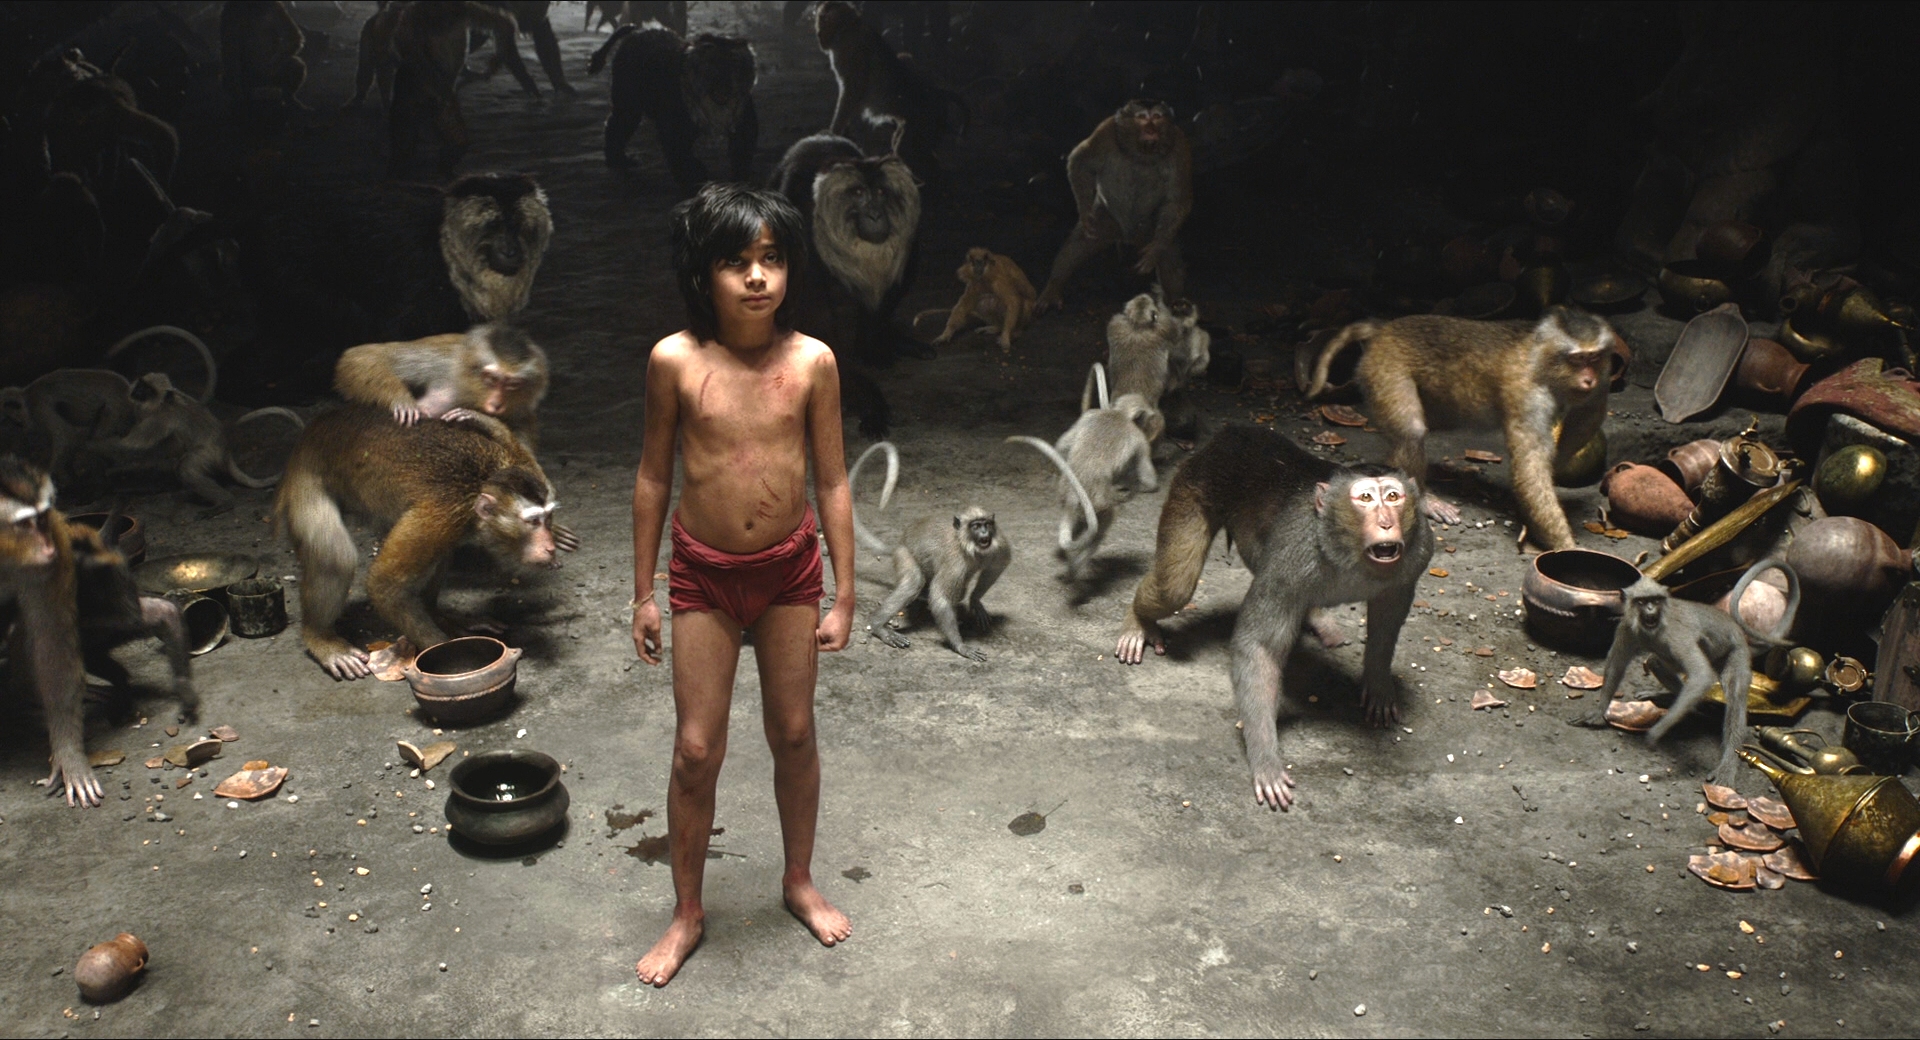 Neel Sethi in The Jungle Book